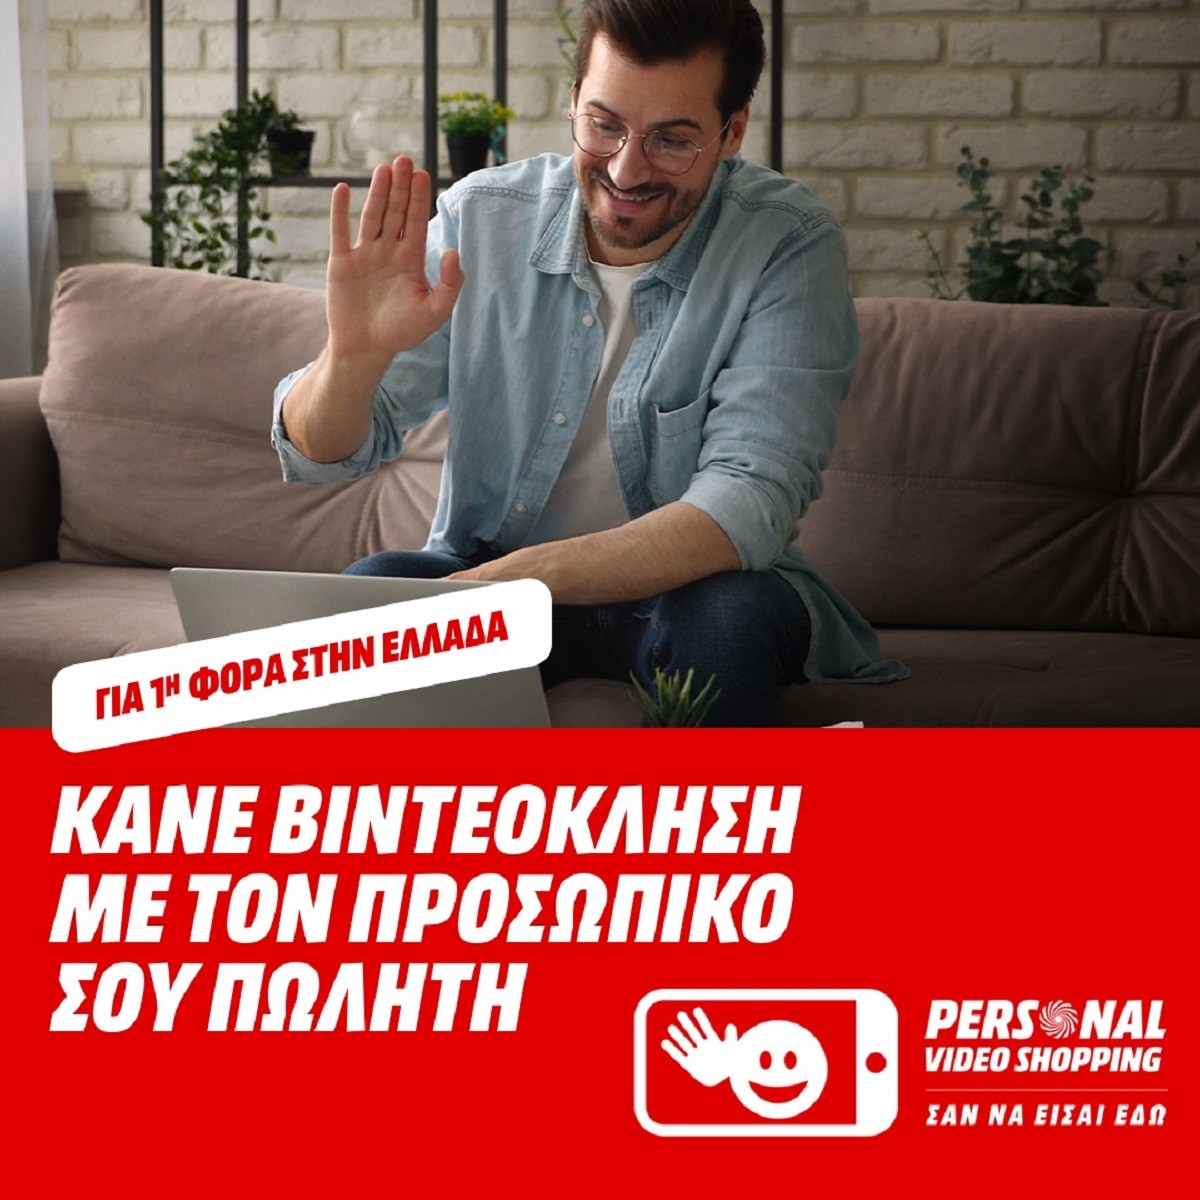 Personal Video Shopping mikri